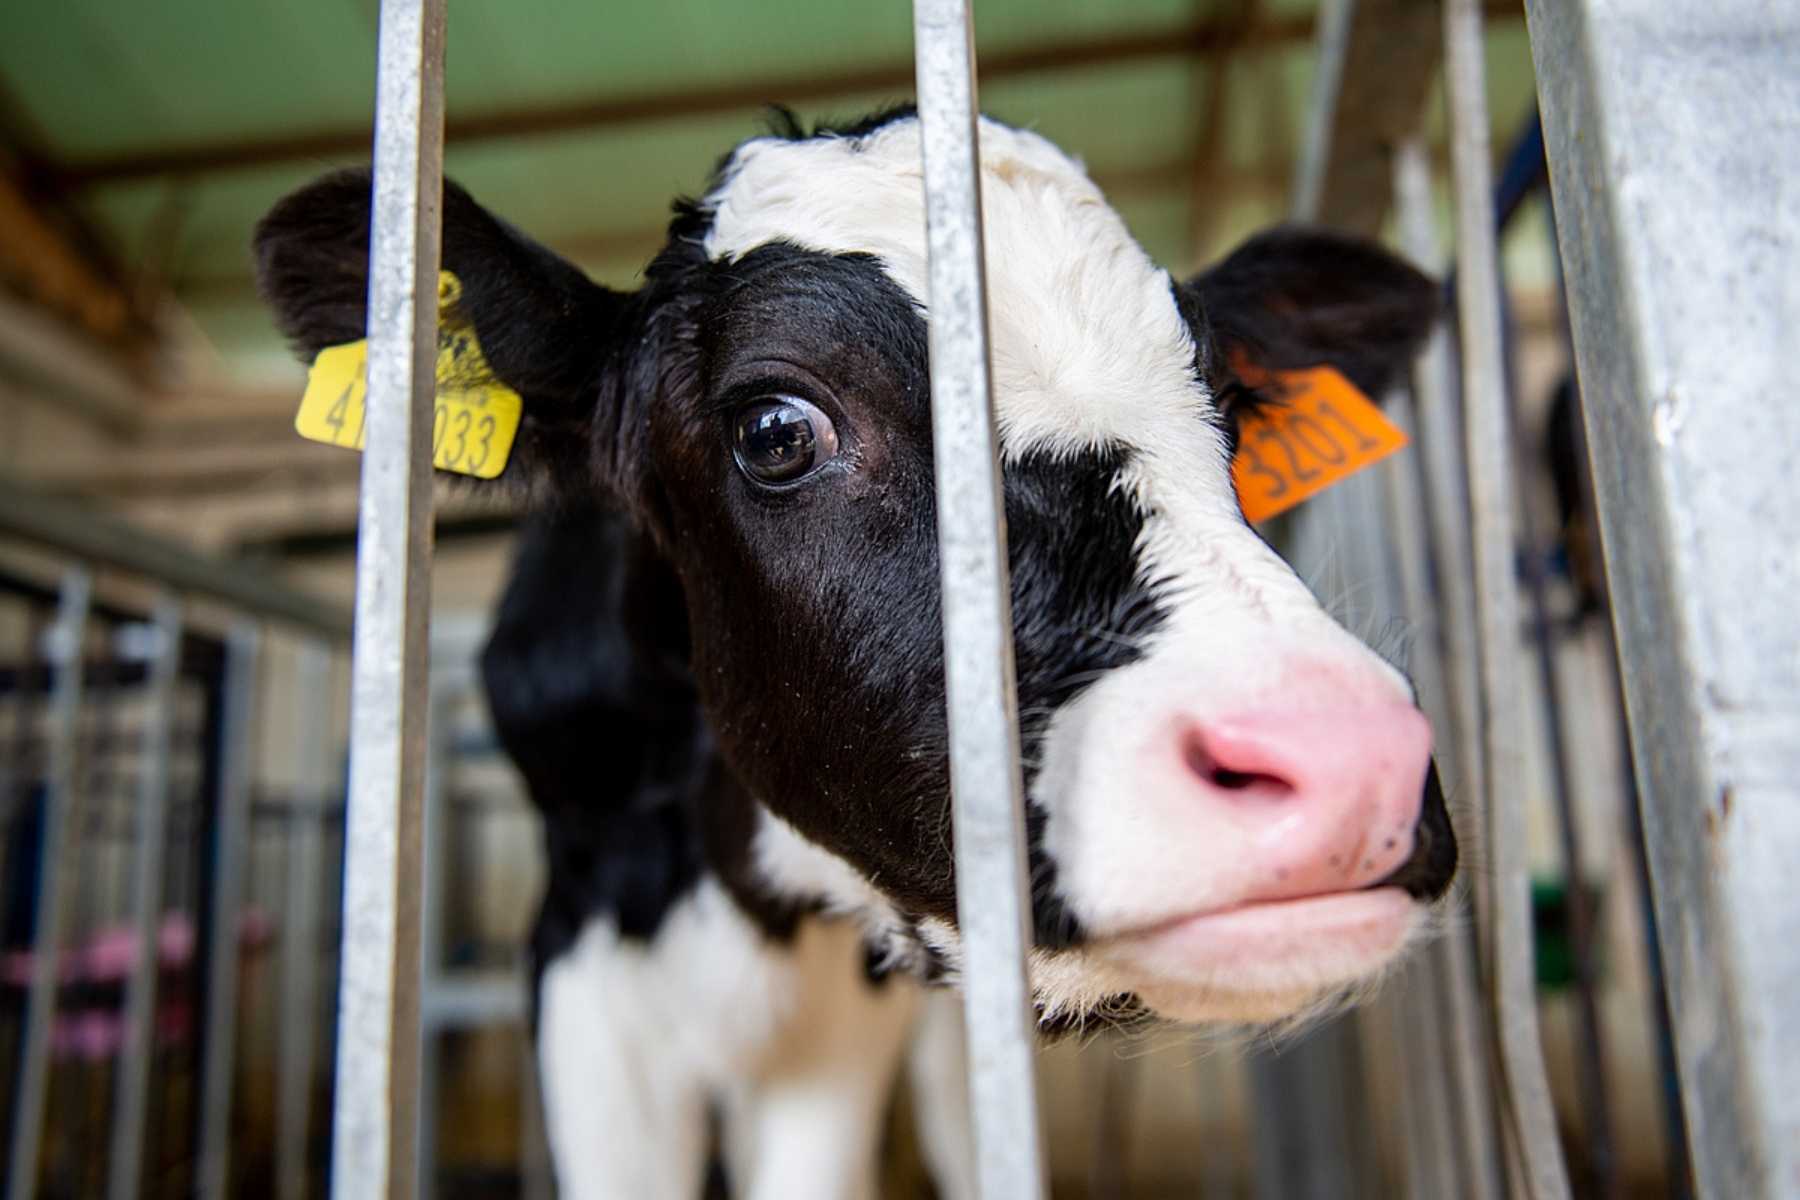 A newborn calf stares into the camera from inside a tiny pen on a dairy farm in Turkiye.